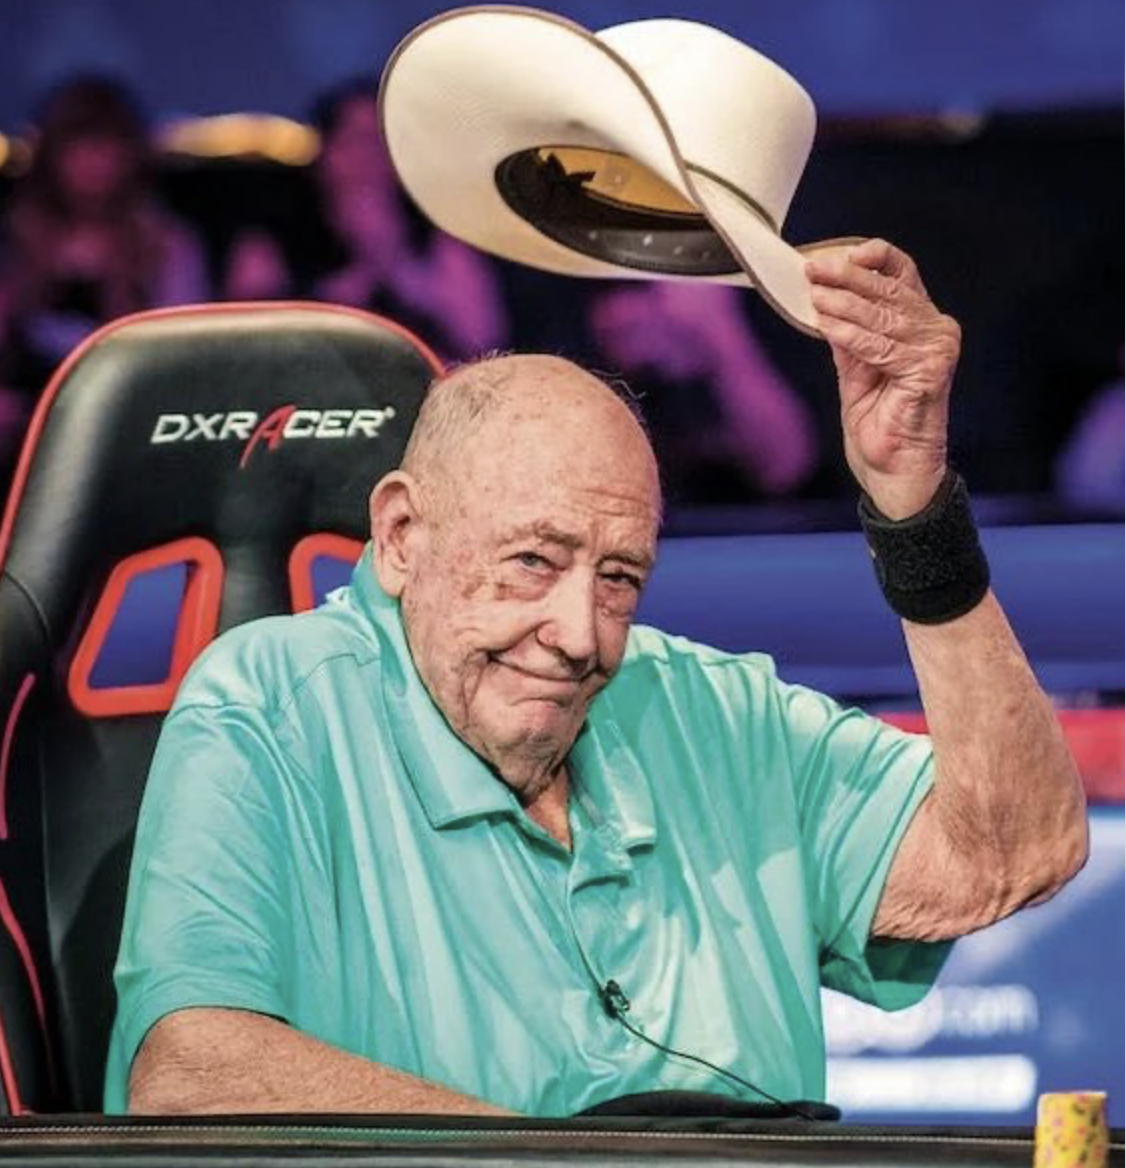 Goodbye ‘Texas Dolly’: News Outlets Around Globe Report on Poker Legend’s Passing